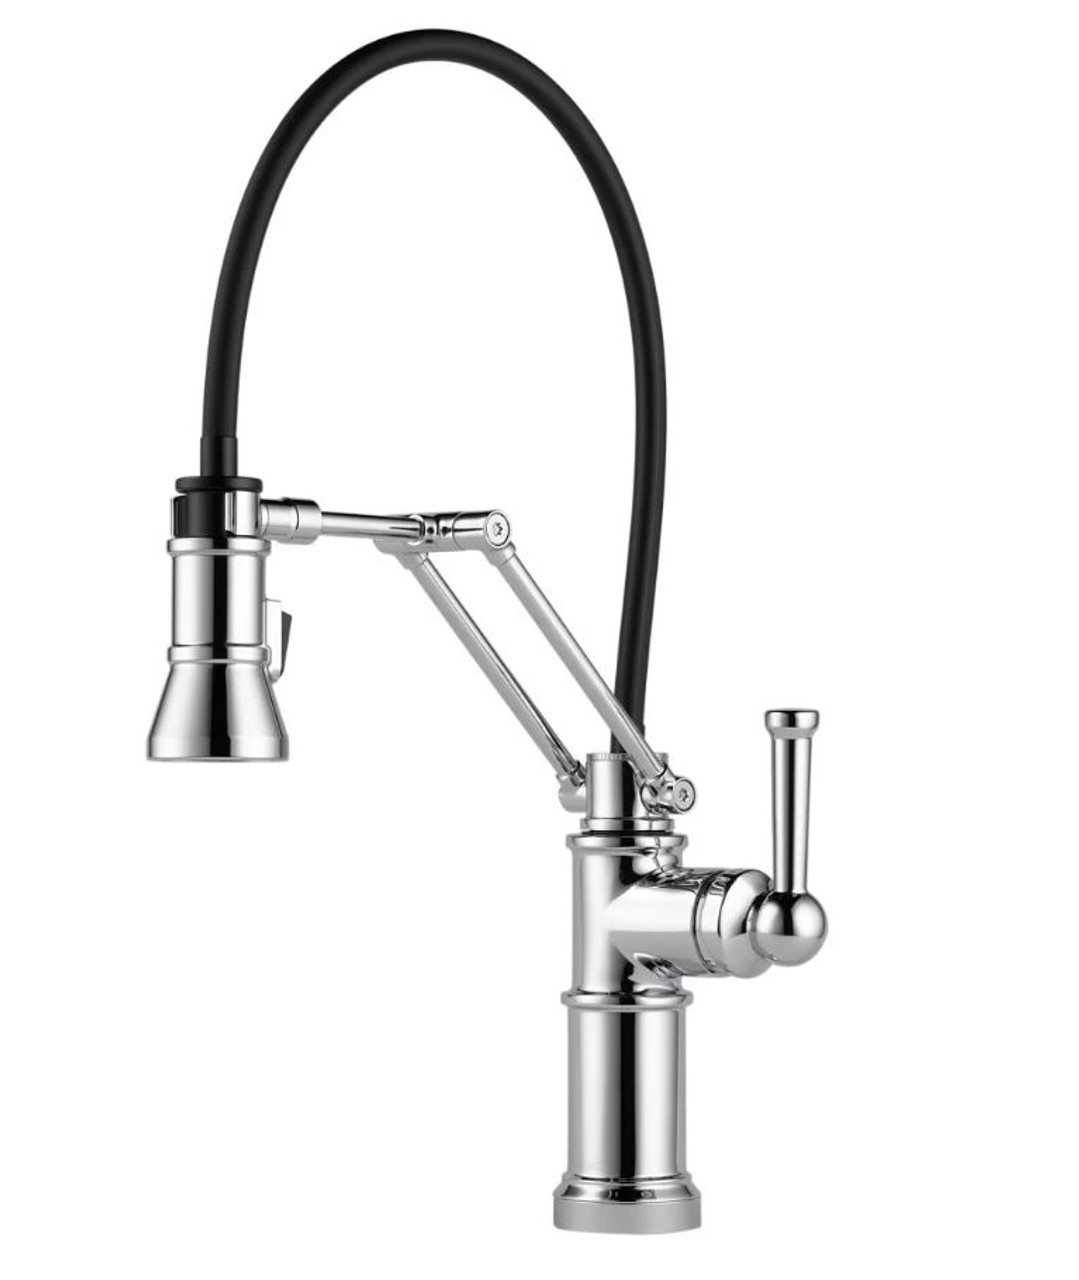 Brizo Artesso Pull Down Kitchen Faucet With Dual Jointed Articulating Arm And Magnetic Docking Spray Head Limited Lifetime Warranty Royal Bath Place